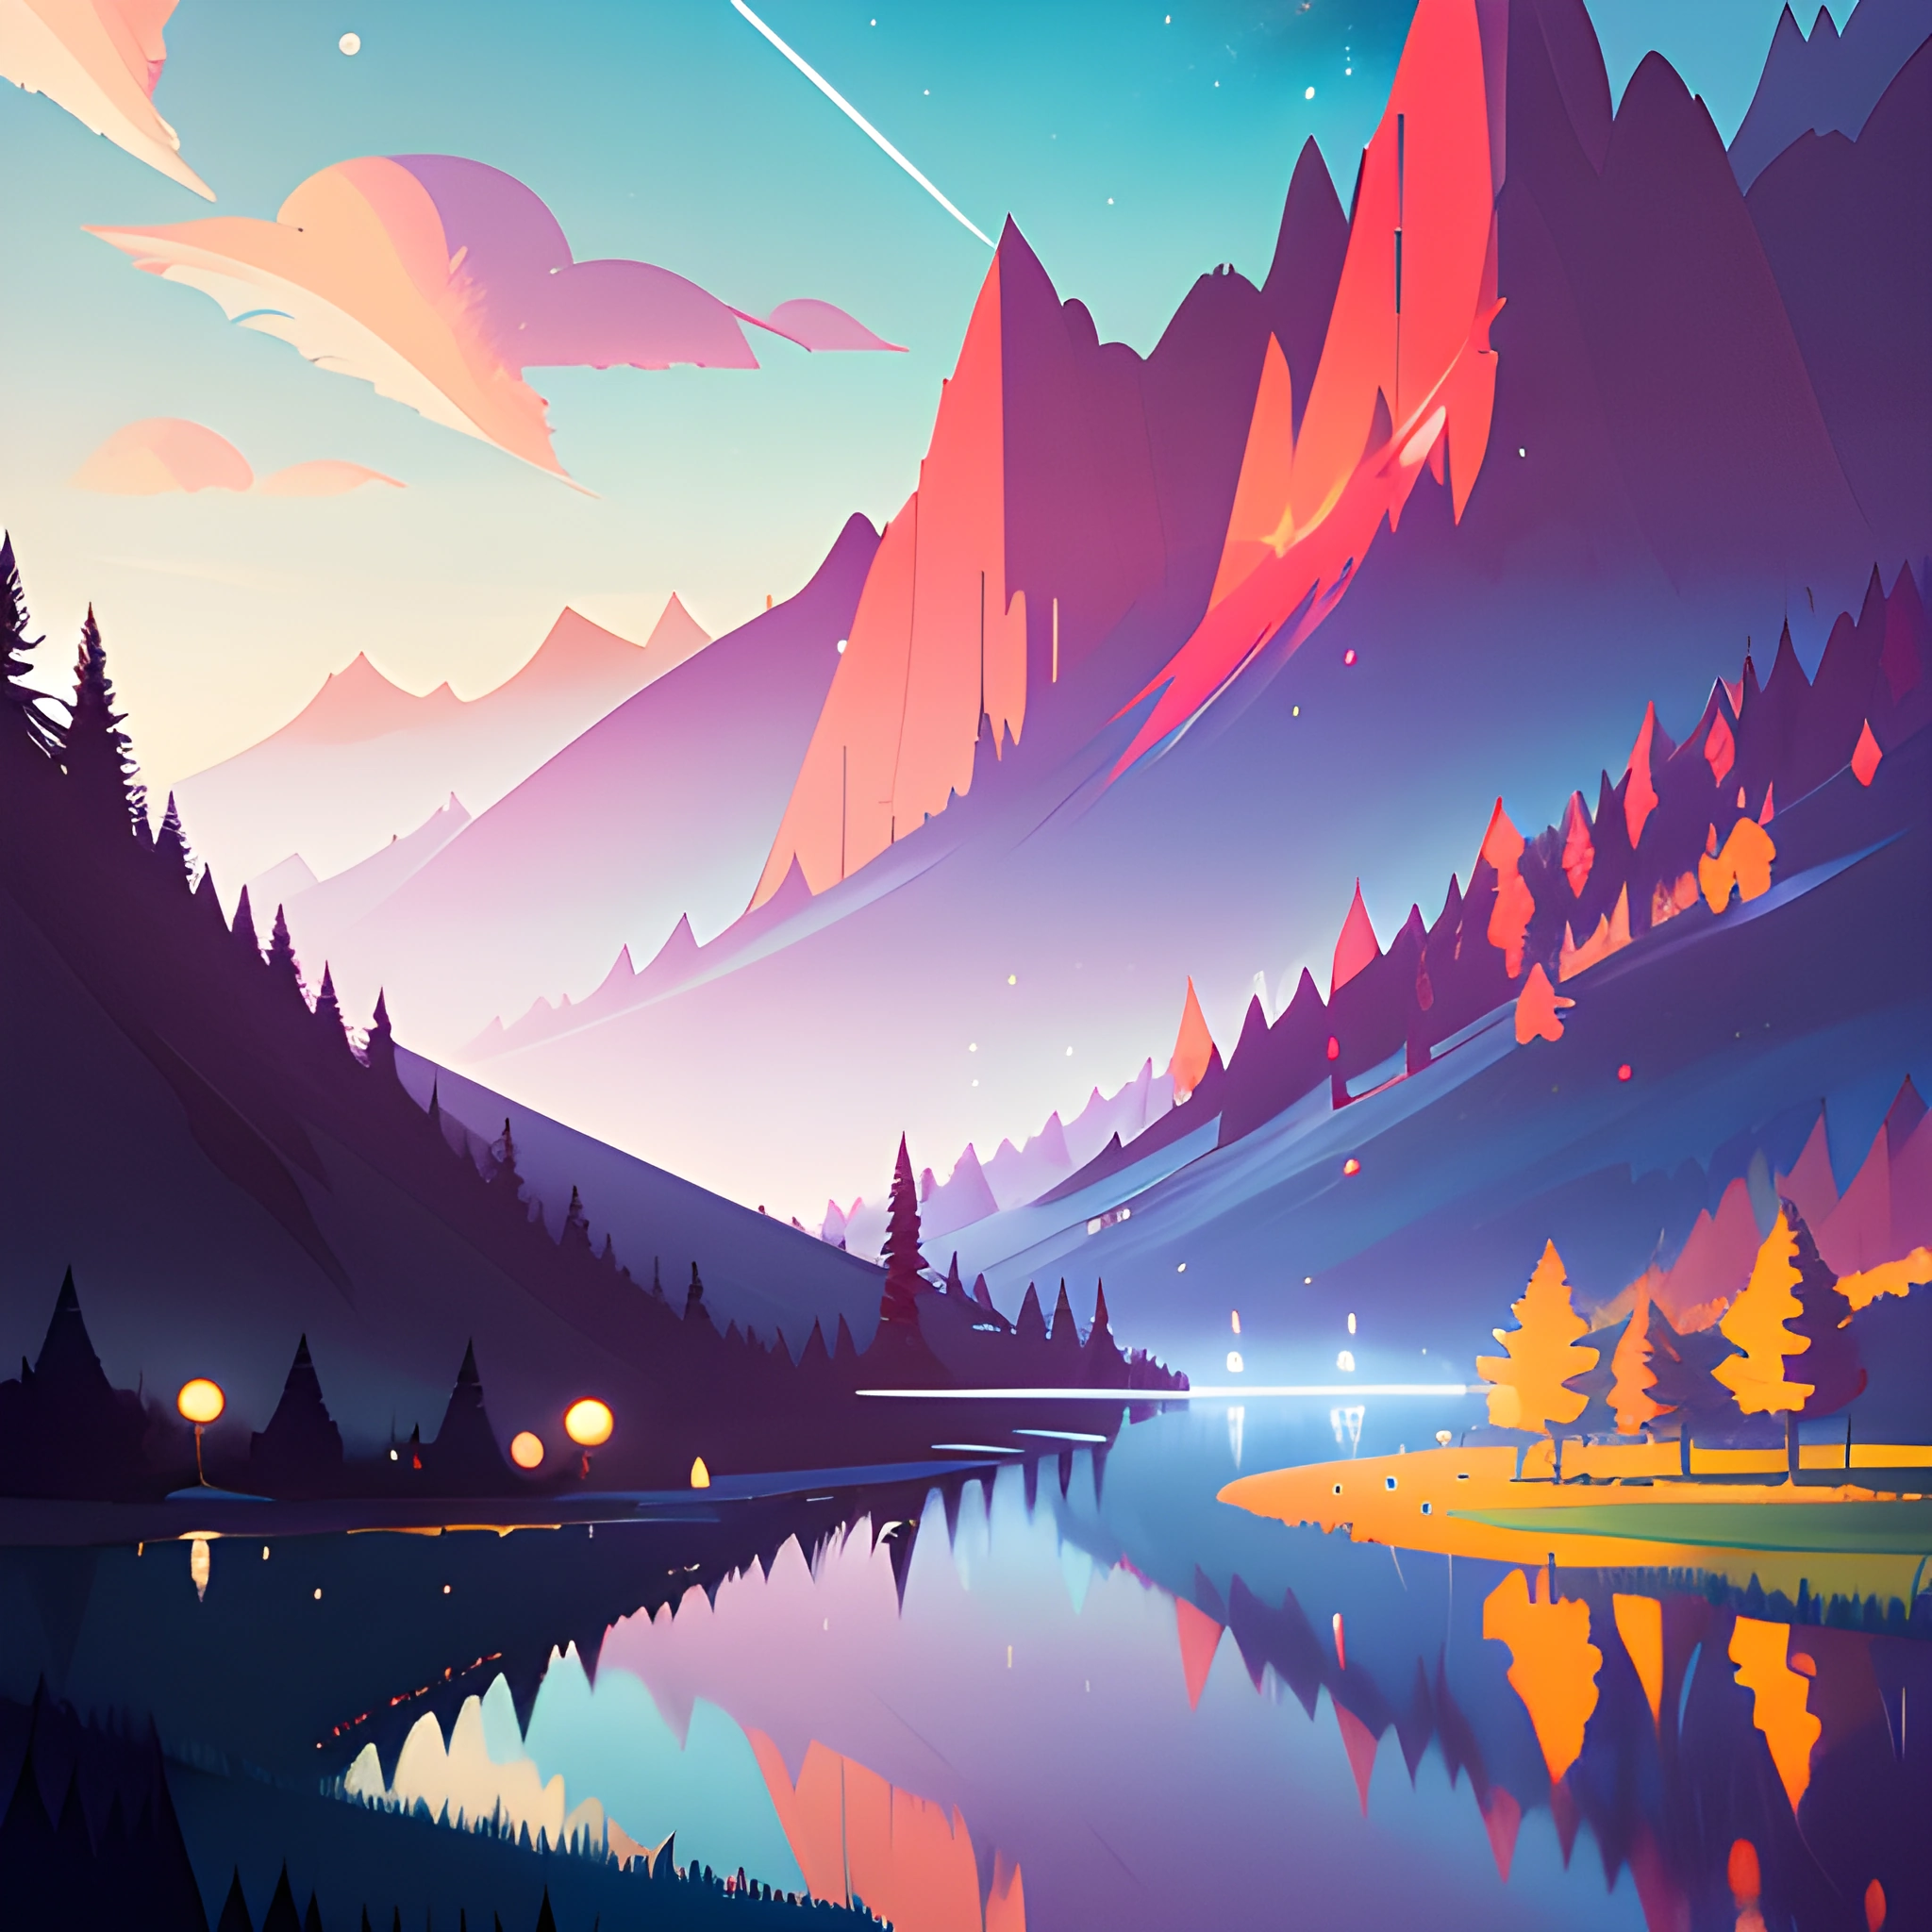 mountains and trees are reflected in a lake at night